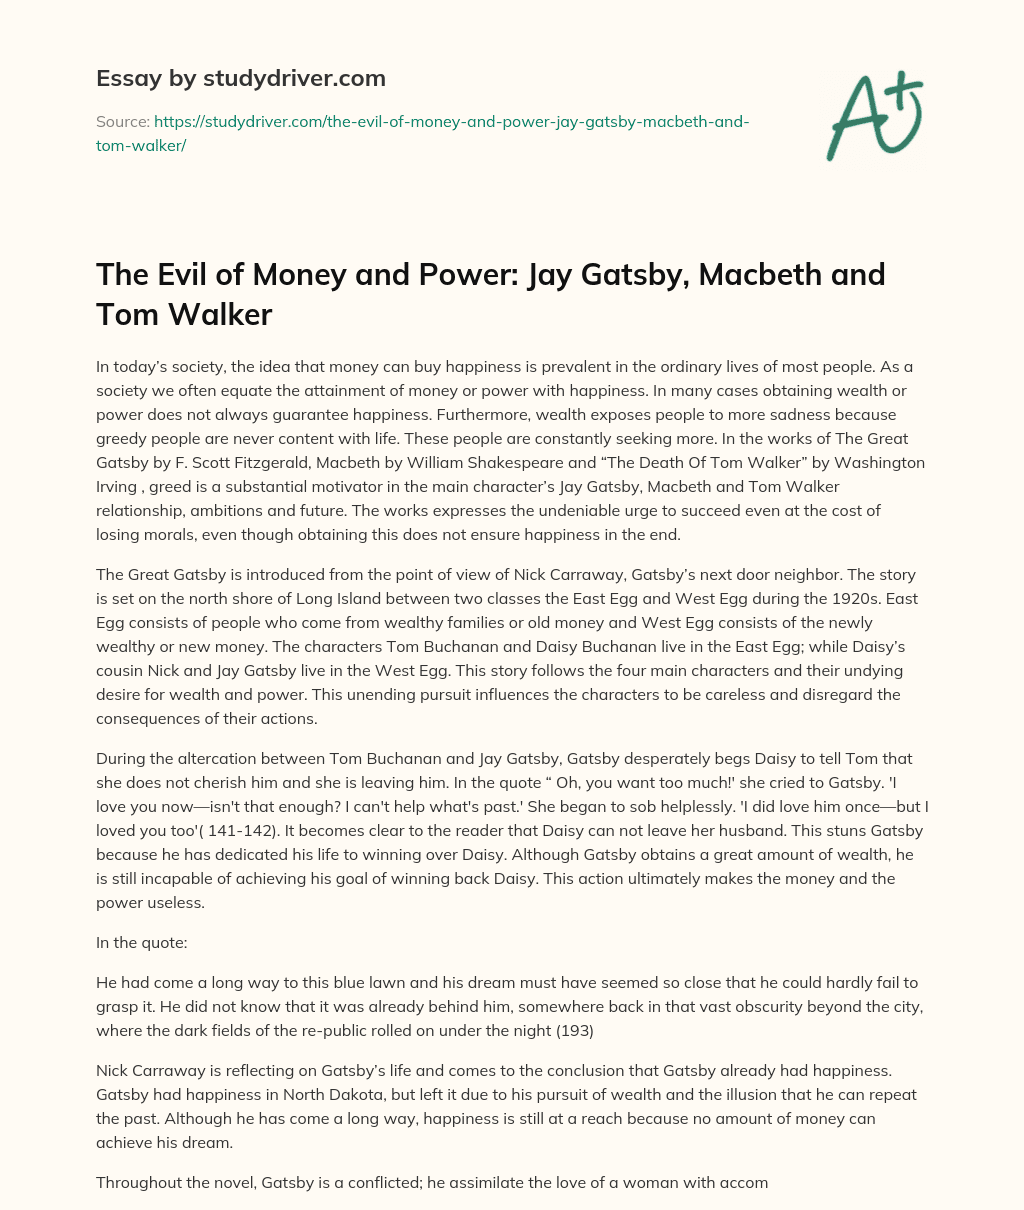 The Evil of Money and Power: Jay Gatsby, Macbeth and Tom Walker essay